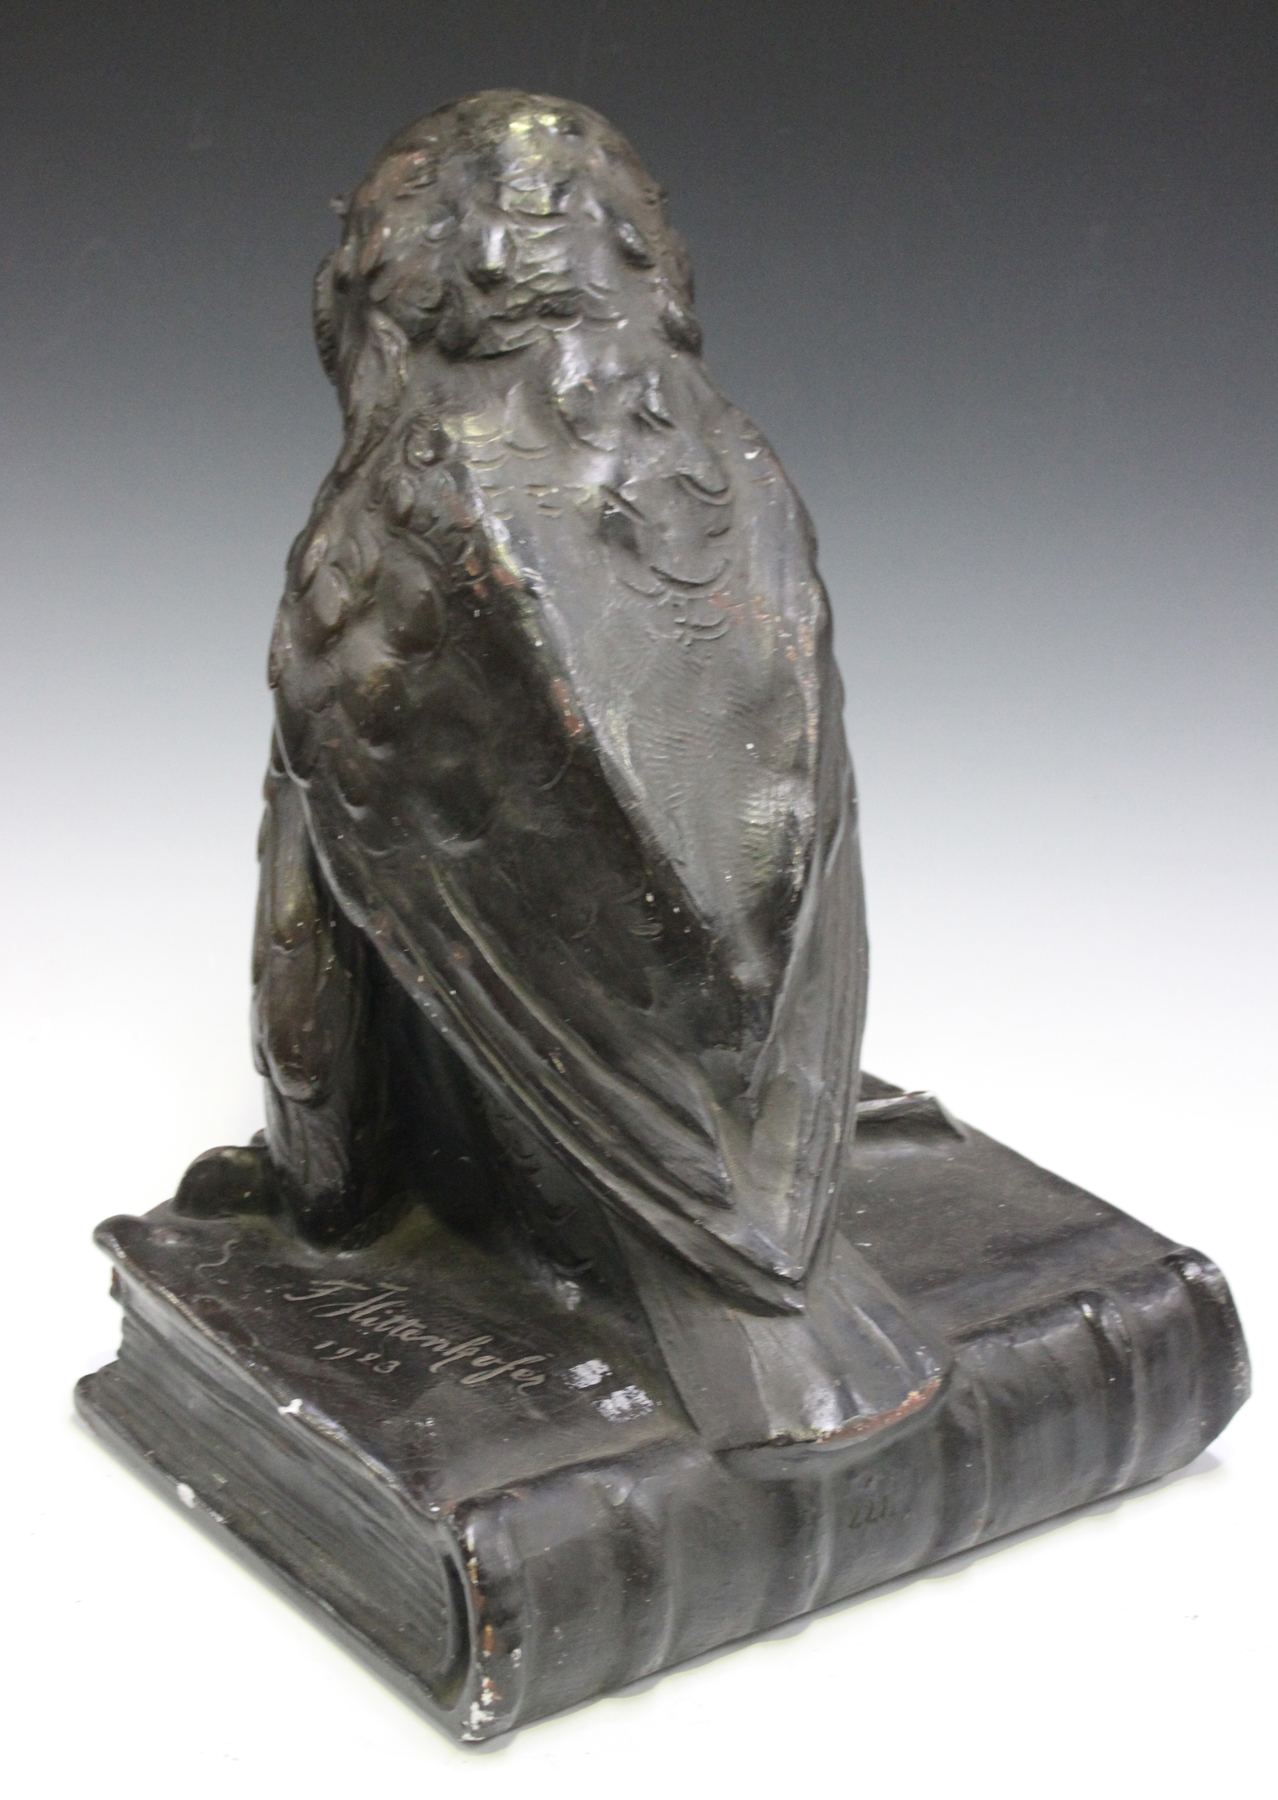 An early 20th century German bronzed cast plaster model of an owl seated on a quill and book, - Image 4 of 4